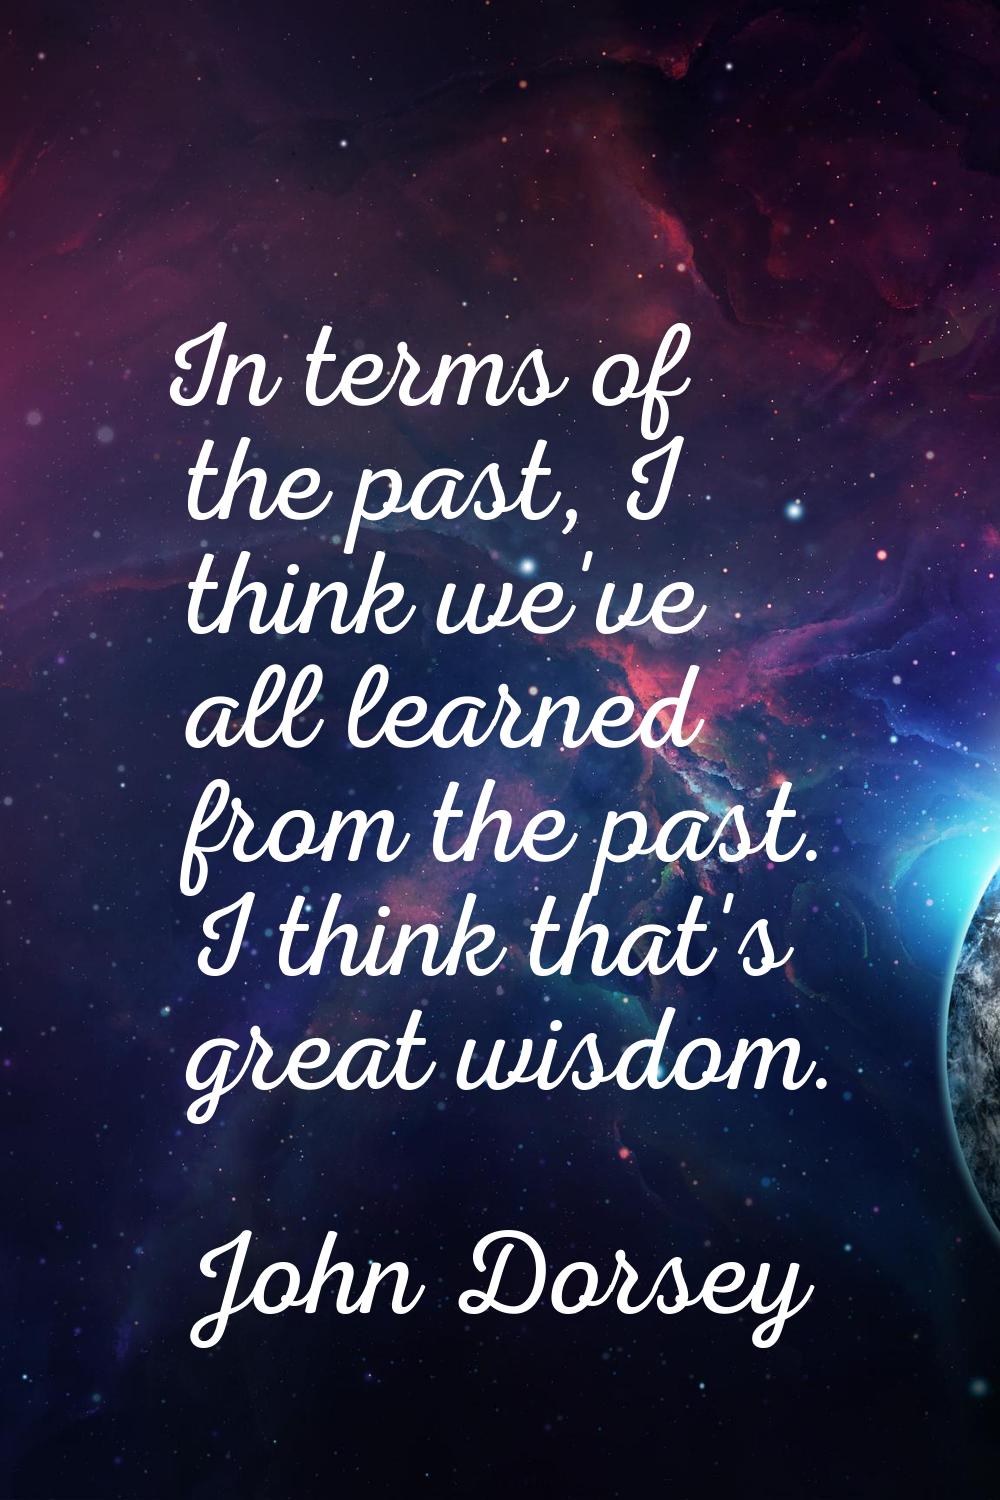 In terms of the past, I think we've all learned from the past. I think that's great wisdom.